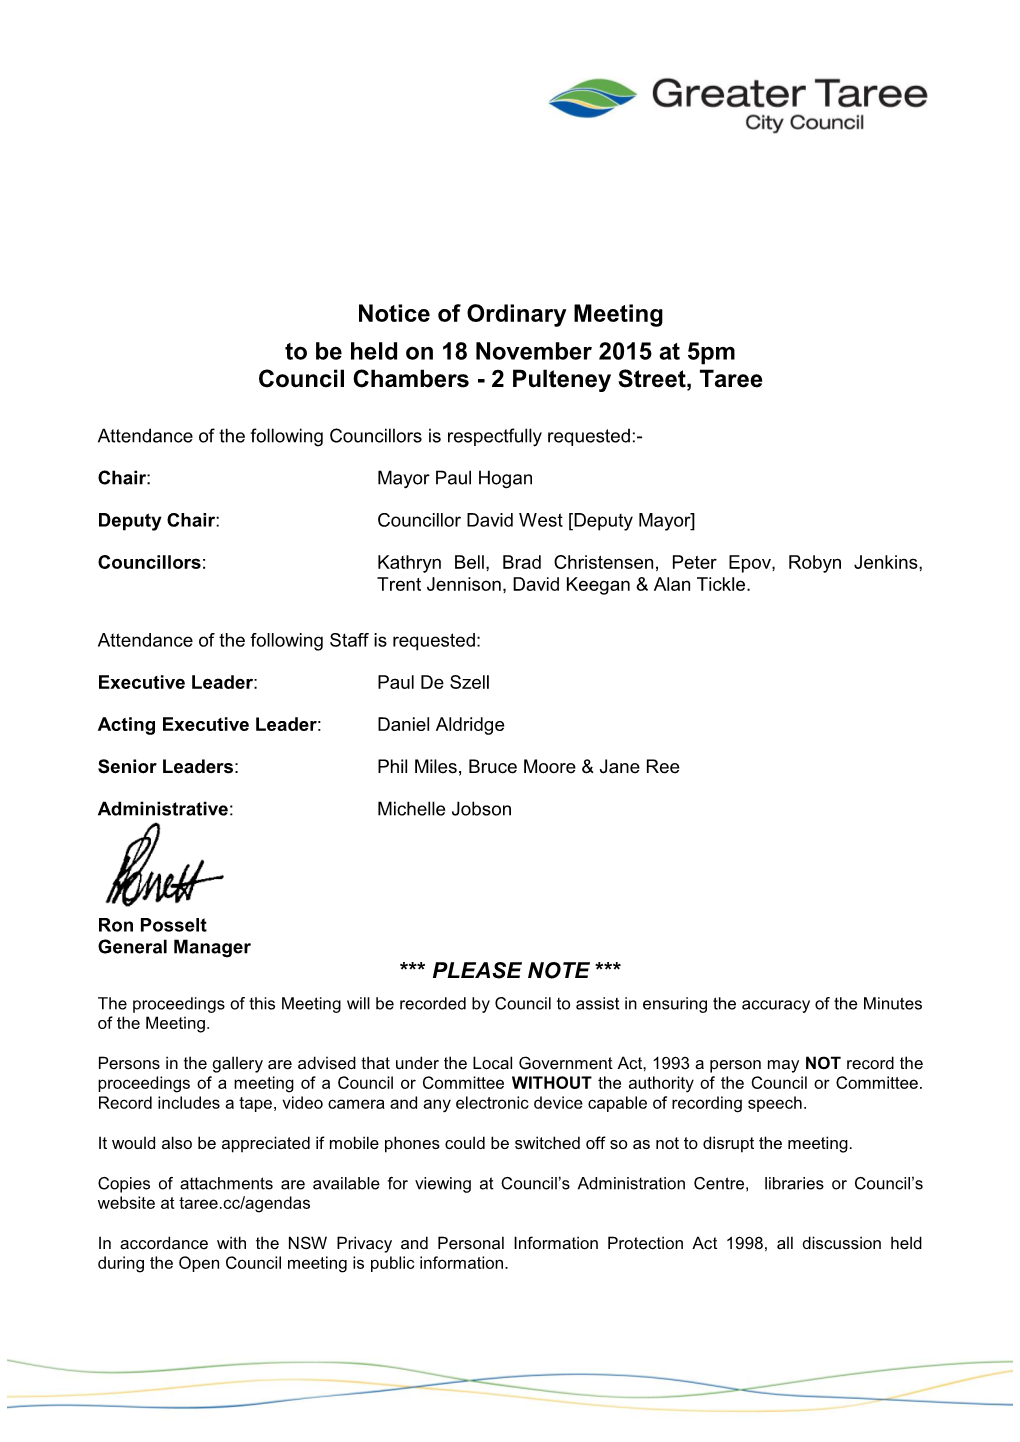 Notice of Ordinary Meeting to Be Held on 18 November 2015 at 5Pm Council Chambers - 2 Pulteney Street, Taree